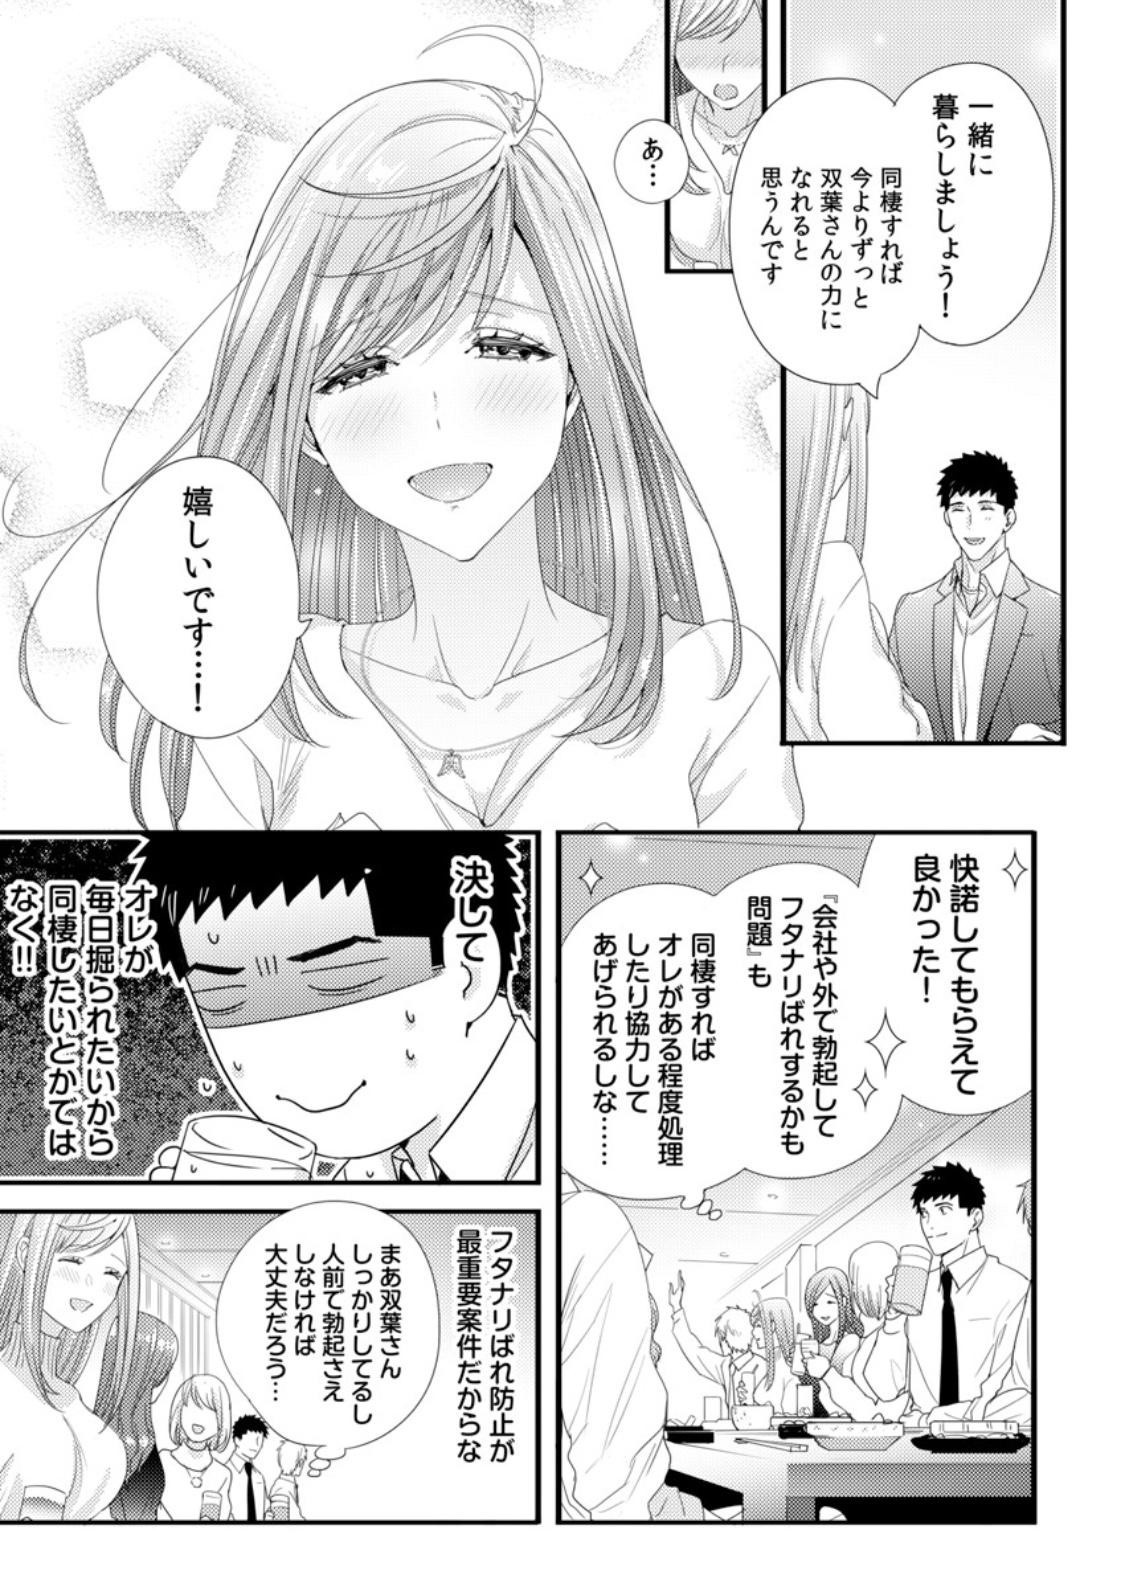 Please Let Me Hold You Futaba-San! Ch. 1-4 81